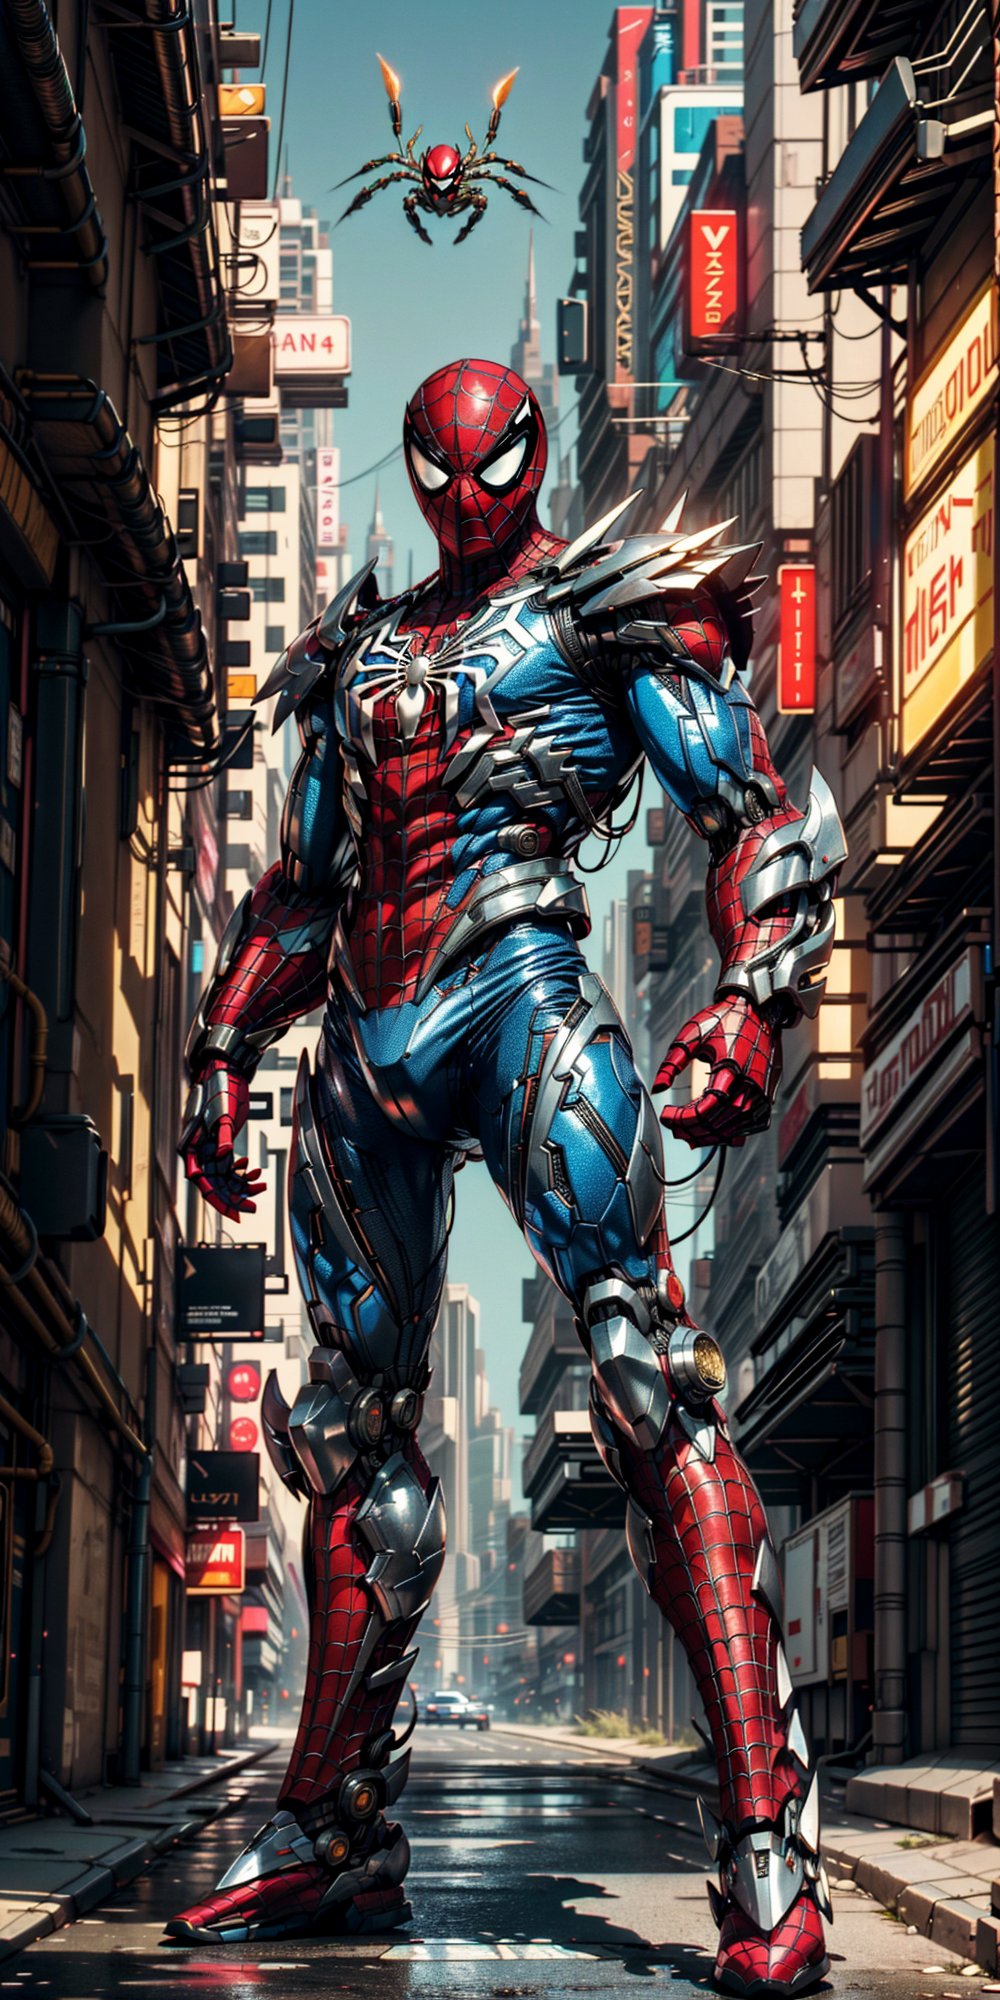 In the neon-lit streets of a cyberpunk metropolis, a Hi-Tech swordsman emerges as a beacon of futuristic prowess. Encased in a robotic suit of red and blue armor, he stands within a pulsating cocoon of yellow luminescence. The armor's intricate details reflect the advanced technology that defines this world.

At his side, a custom cyber-style sword gleams with an otherworldly radiance, its blade a fusion of artistry and advanced engineering. The streets behind him are awash in the vibrant glow of neon signs and holographic advertisements, painting a vivid backdrop to his enigmatic presence.

The image captures every gleam and glint in astonishing 4K Ultra HDR quality, enhancing the fine details of the cybernetic armor and the interplay of light and shadow in the urban setting. This scene encapsulates the essence of cyberpunk's high-tech aesthetics, delivering an image that seamlessly marries advanced technology with cutting-edge style.,mecha musume,robot, (blurry background), (high detailed image HDR quality), (32k HDR resolution quality), realistic mecha suit armour, (((spider-man style mecha armour))),perfecteyes